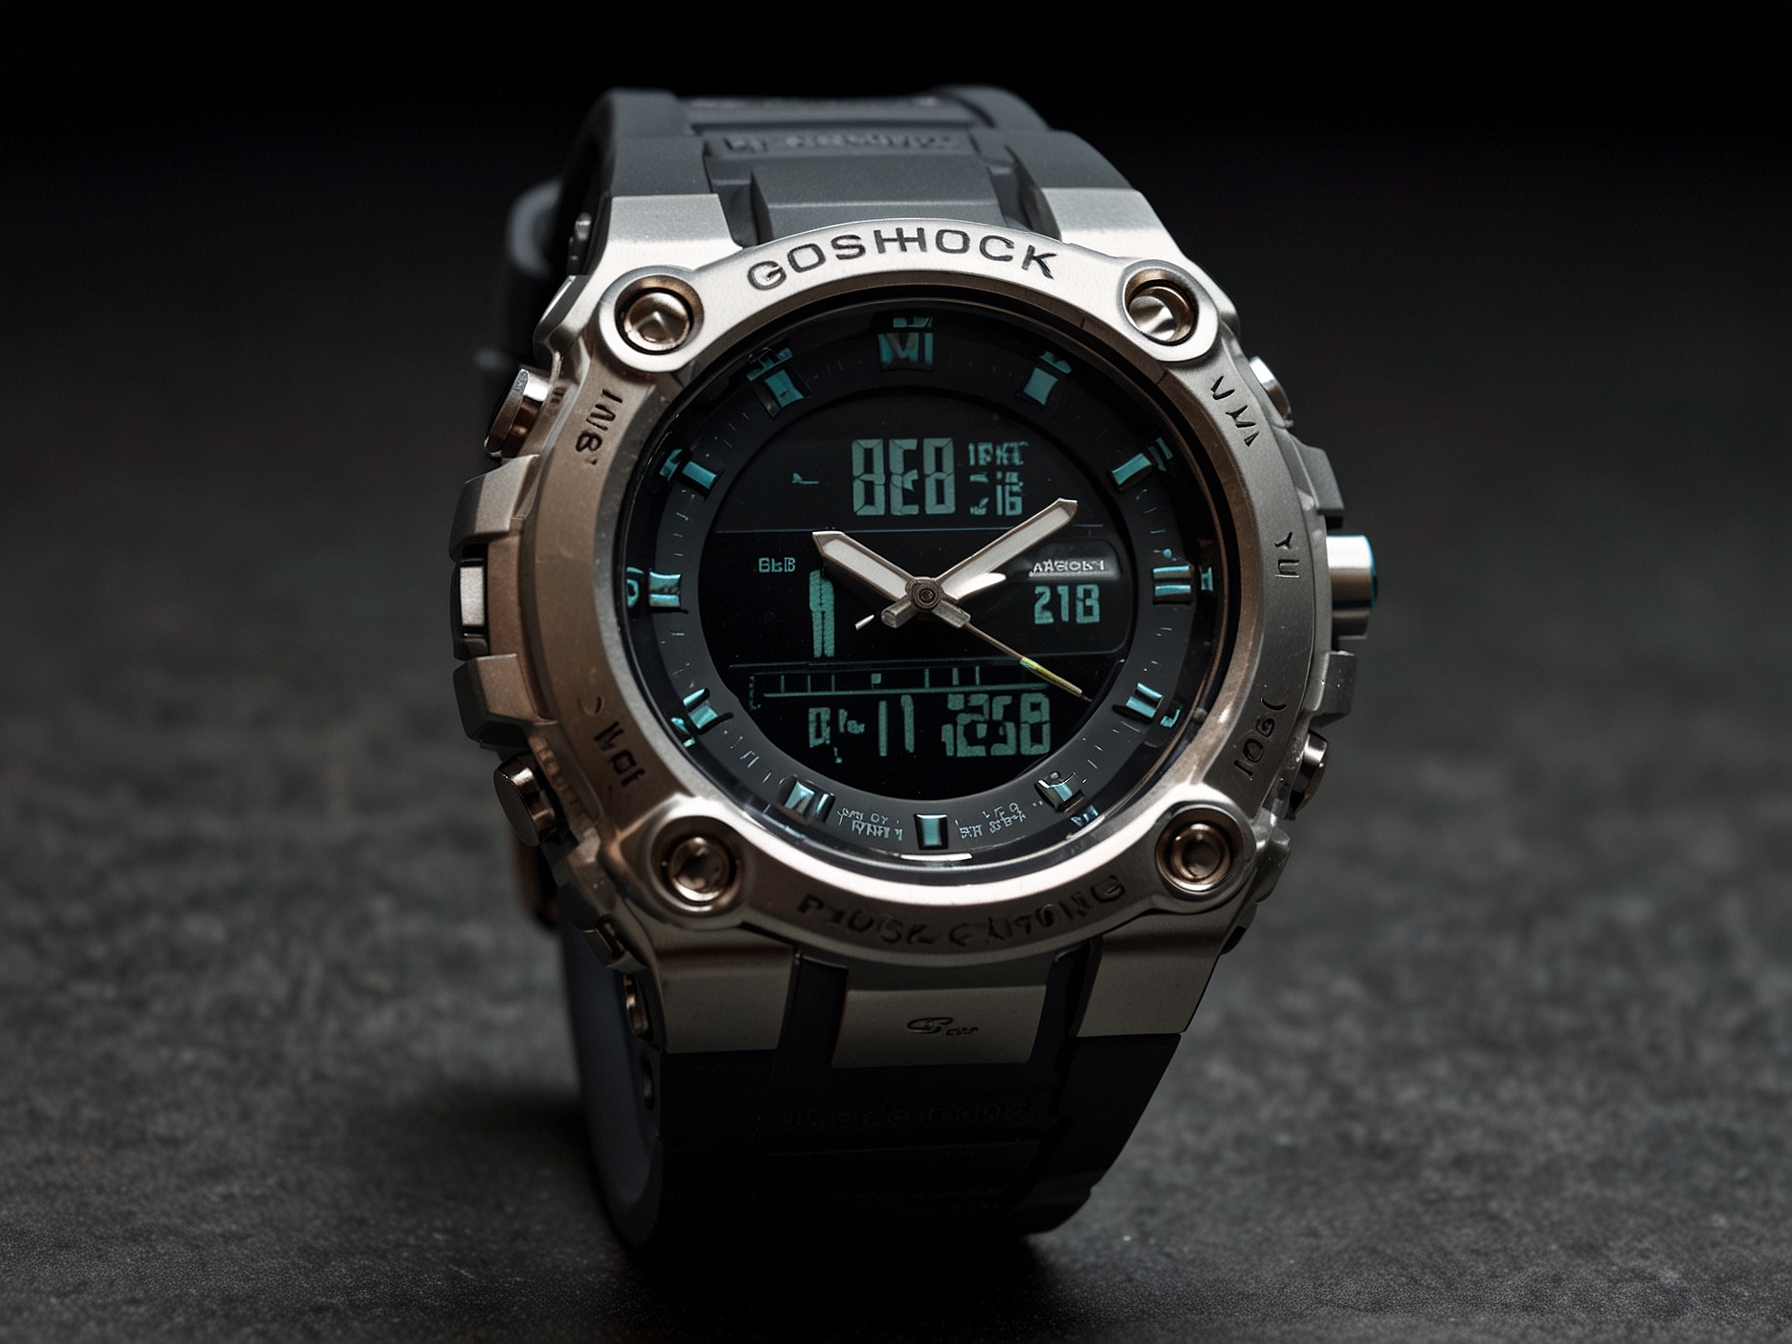 A sleek, slim G-SHOCK GBD-300 watch displaying a detailed workout log, including steps taken, calories burned, and distance traveled. The watch's screen is easy to read, even during vigorous activities.